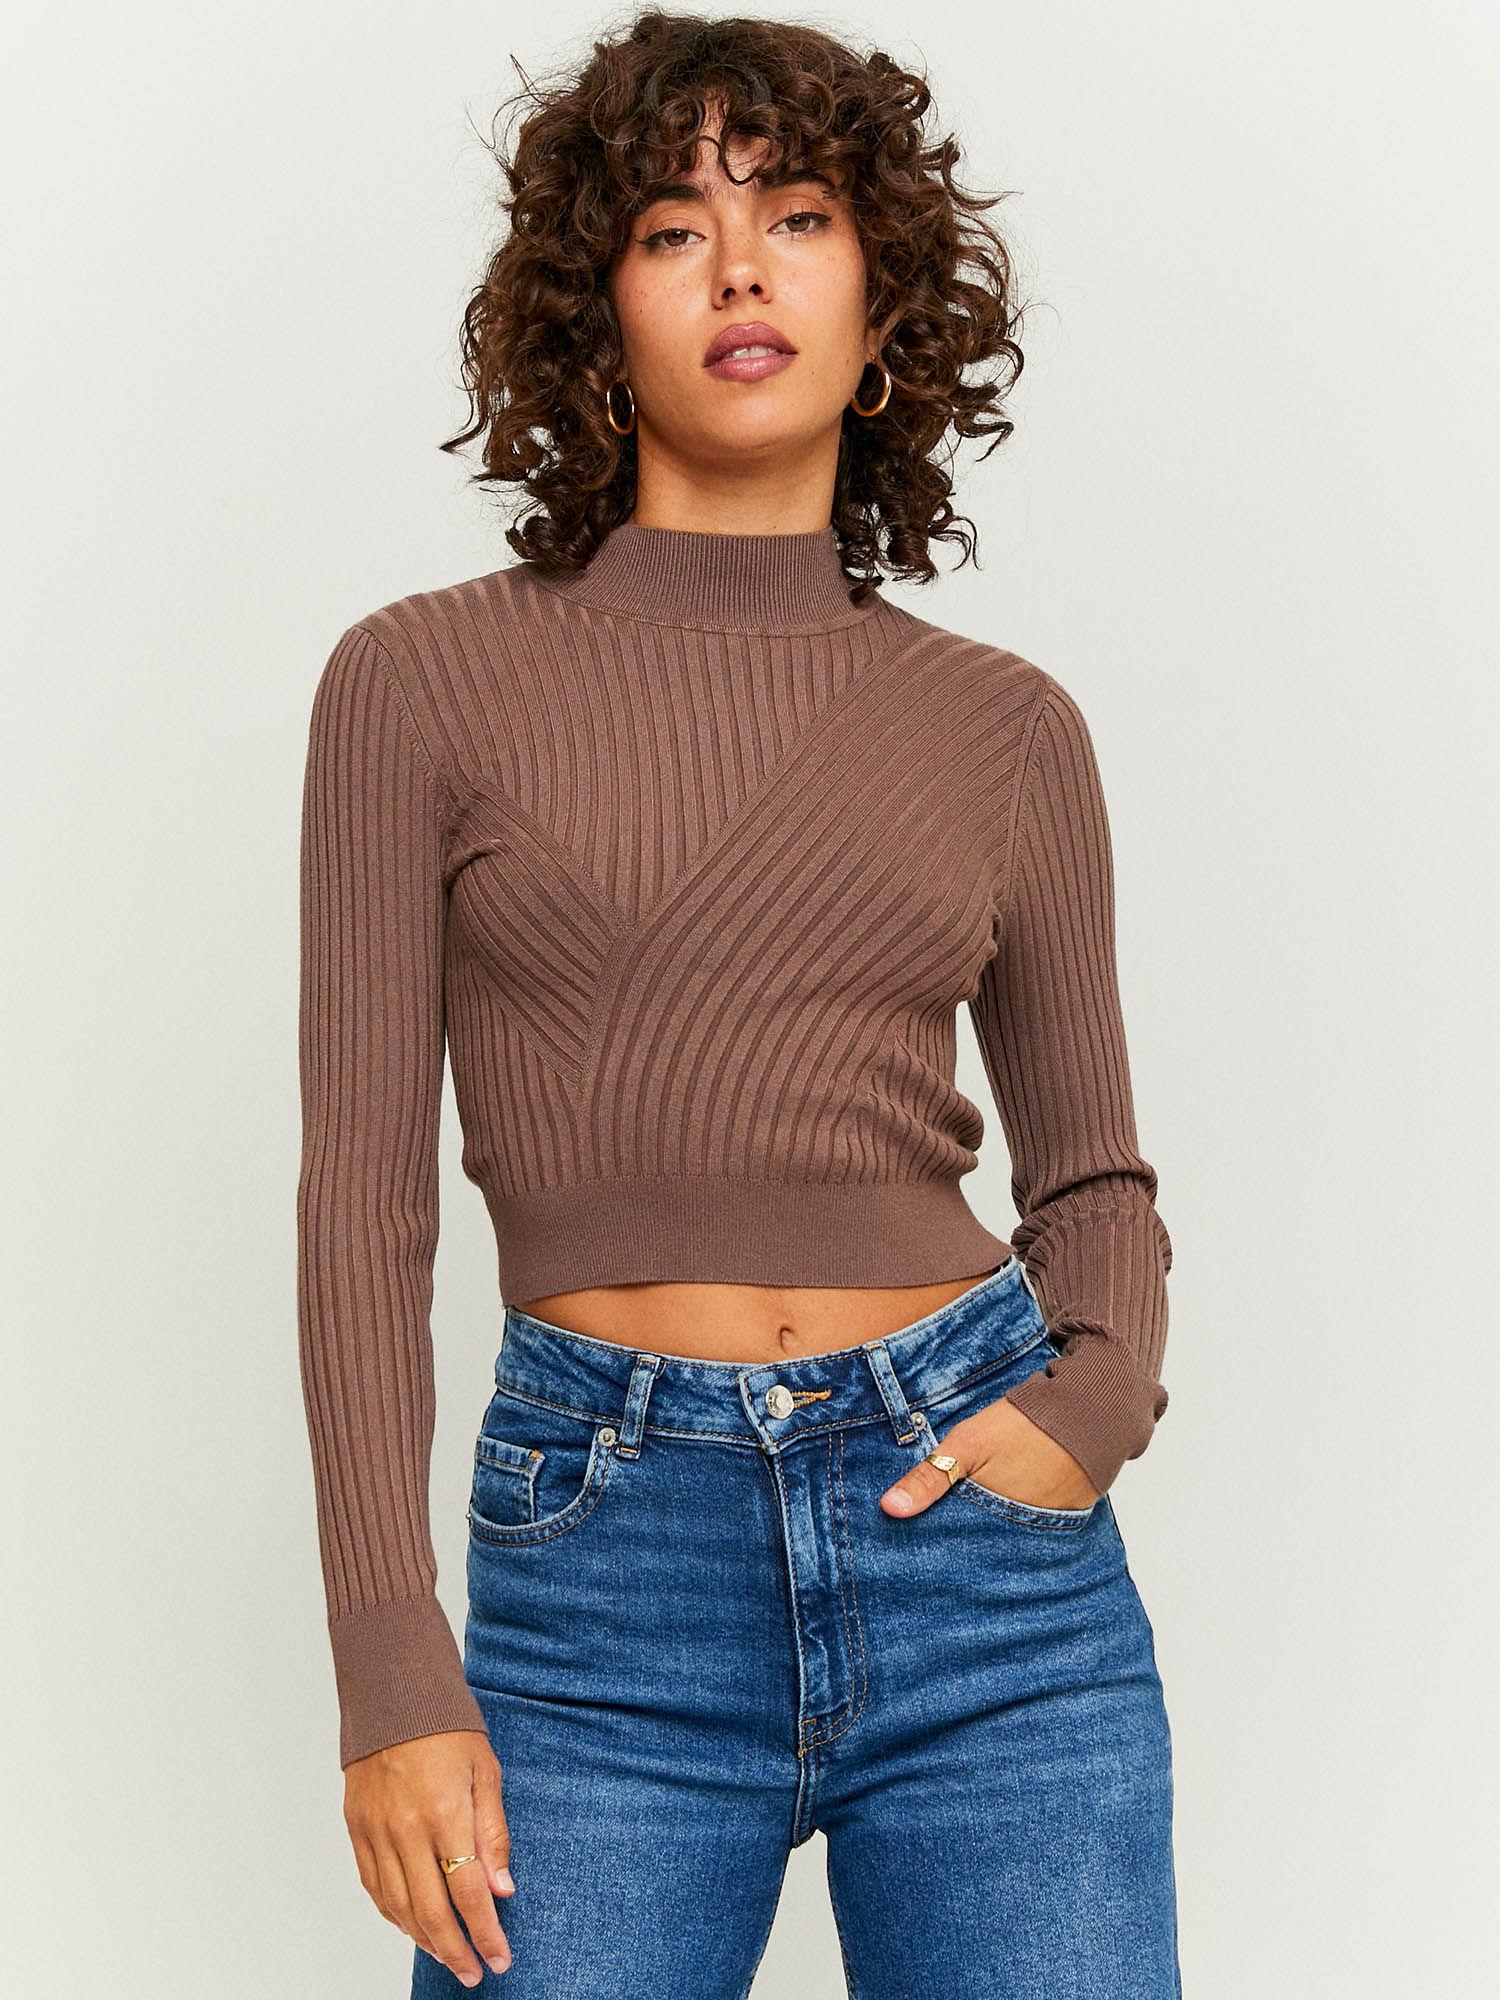 high-neck knitted patterned pullover in taupe